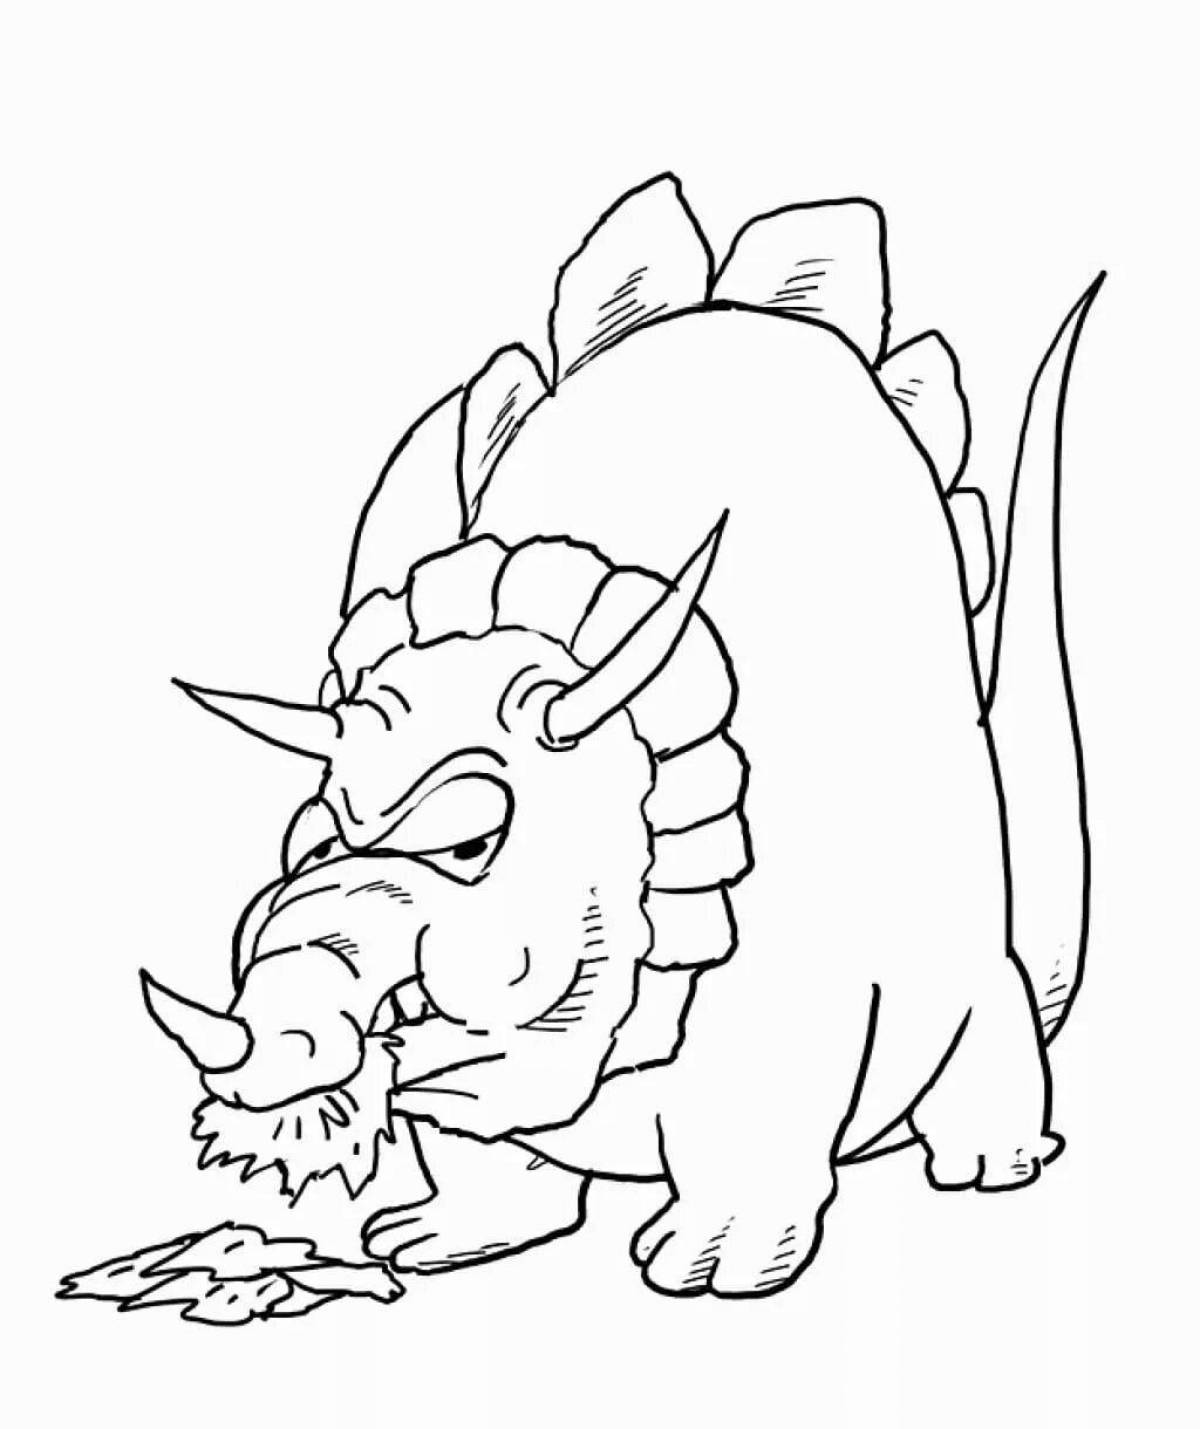 Coloring book shining triceratops